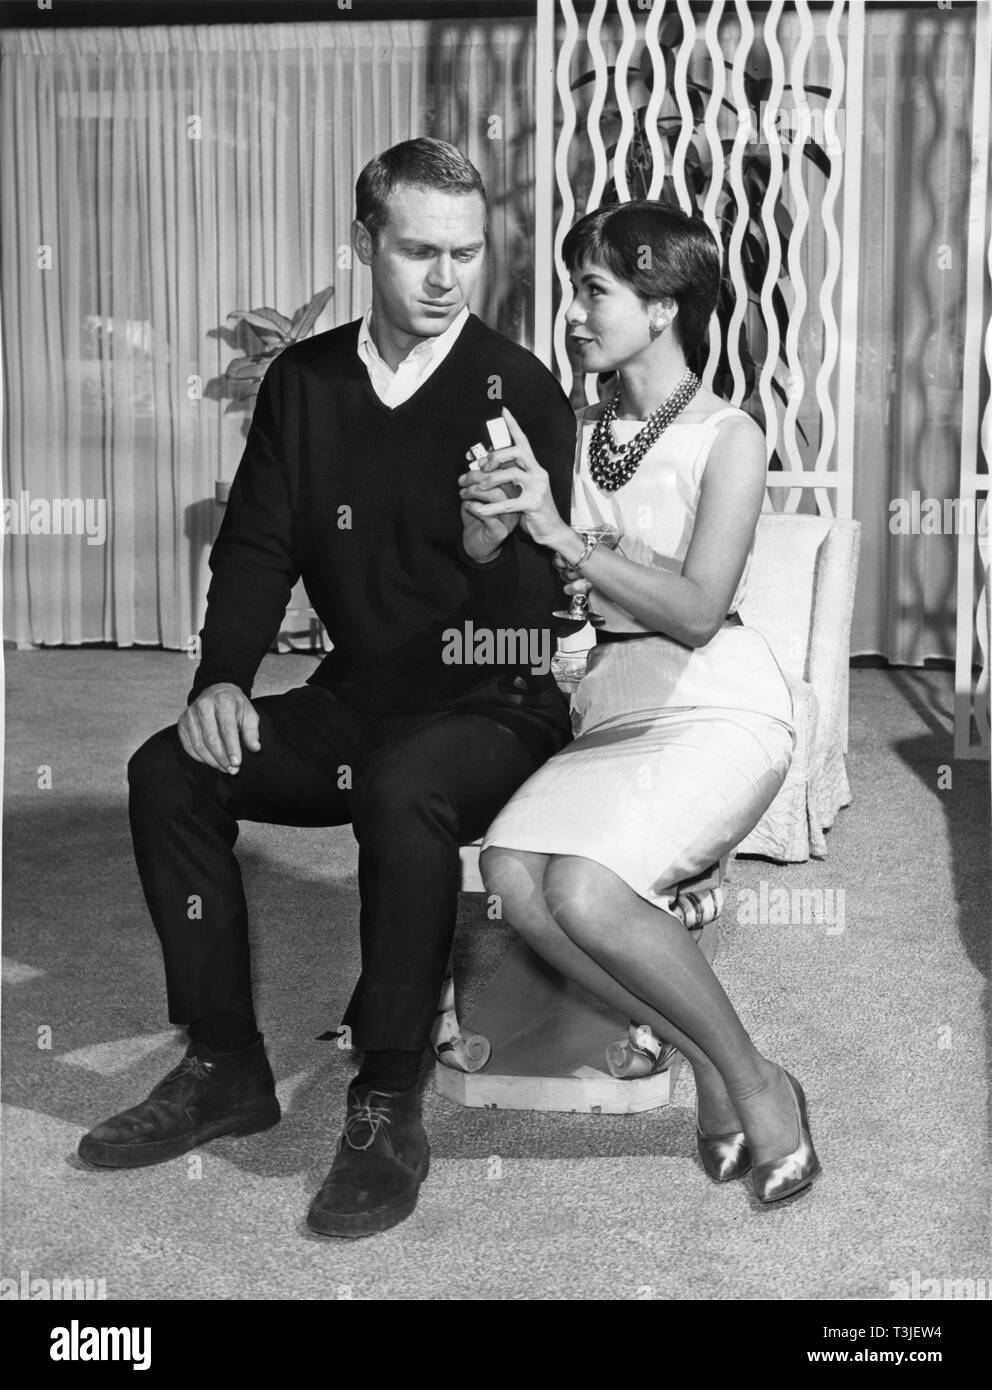 Steve McQueen and first wife Neile Adams MAN FROM THE SOUTH 1960 episode 15 Season 5 ALFRED HITCHCOCK PRESENTS director Norman Lloyd story by Roald Dahl aired January 3 1960 Alfred J. Hitchcock Productions / Shamley Productions / MCA TV / CBS Television Network Stock Photo